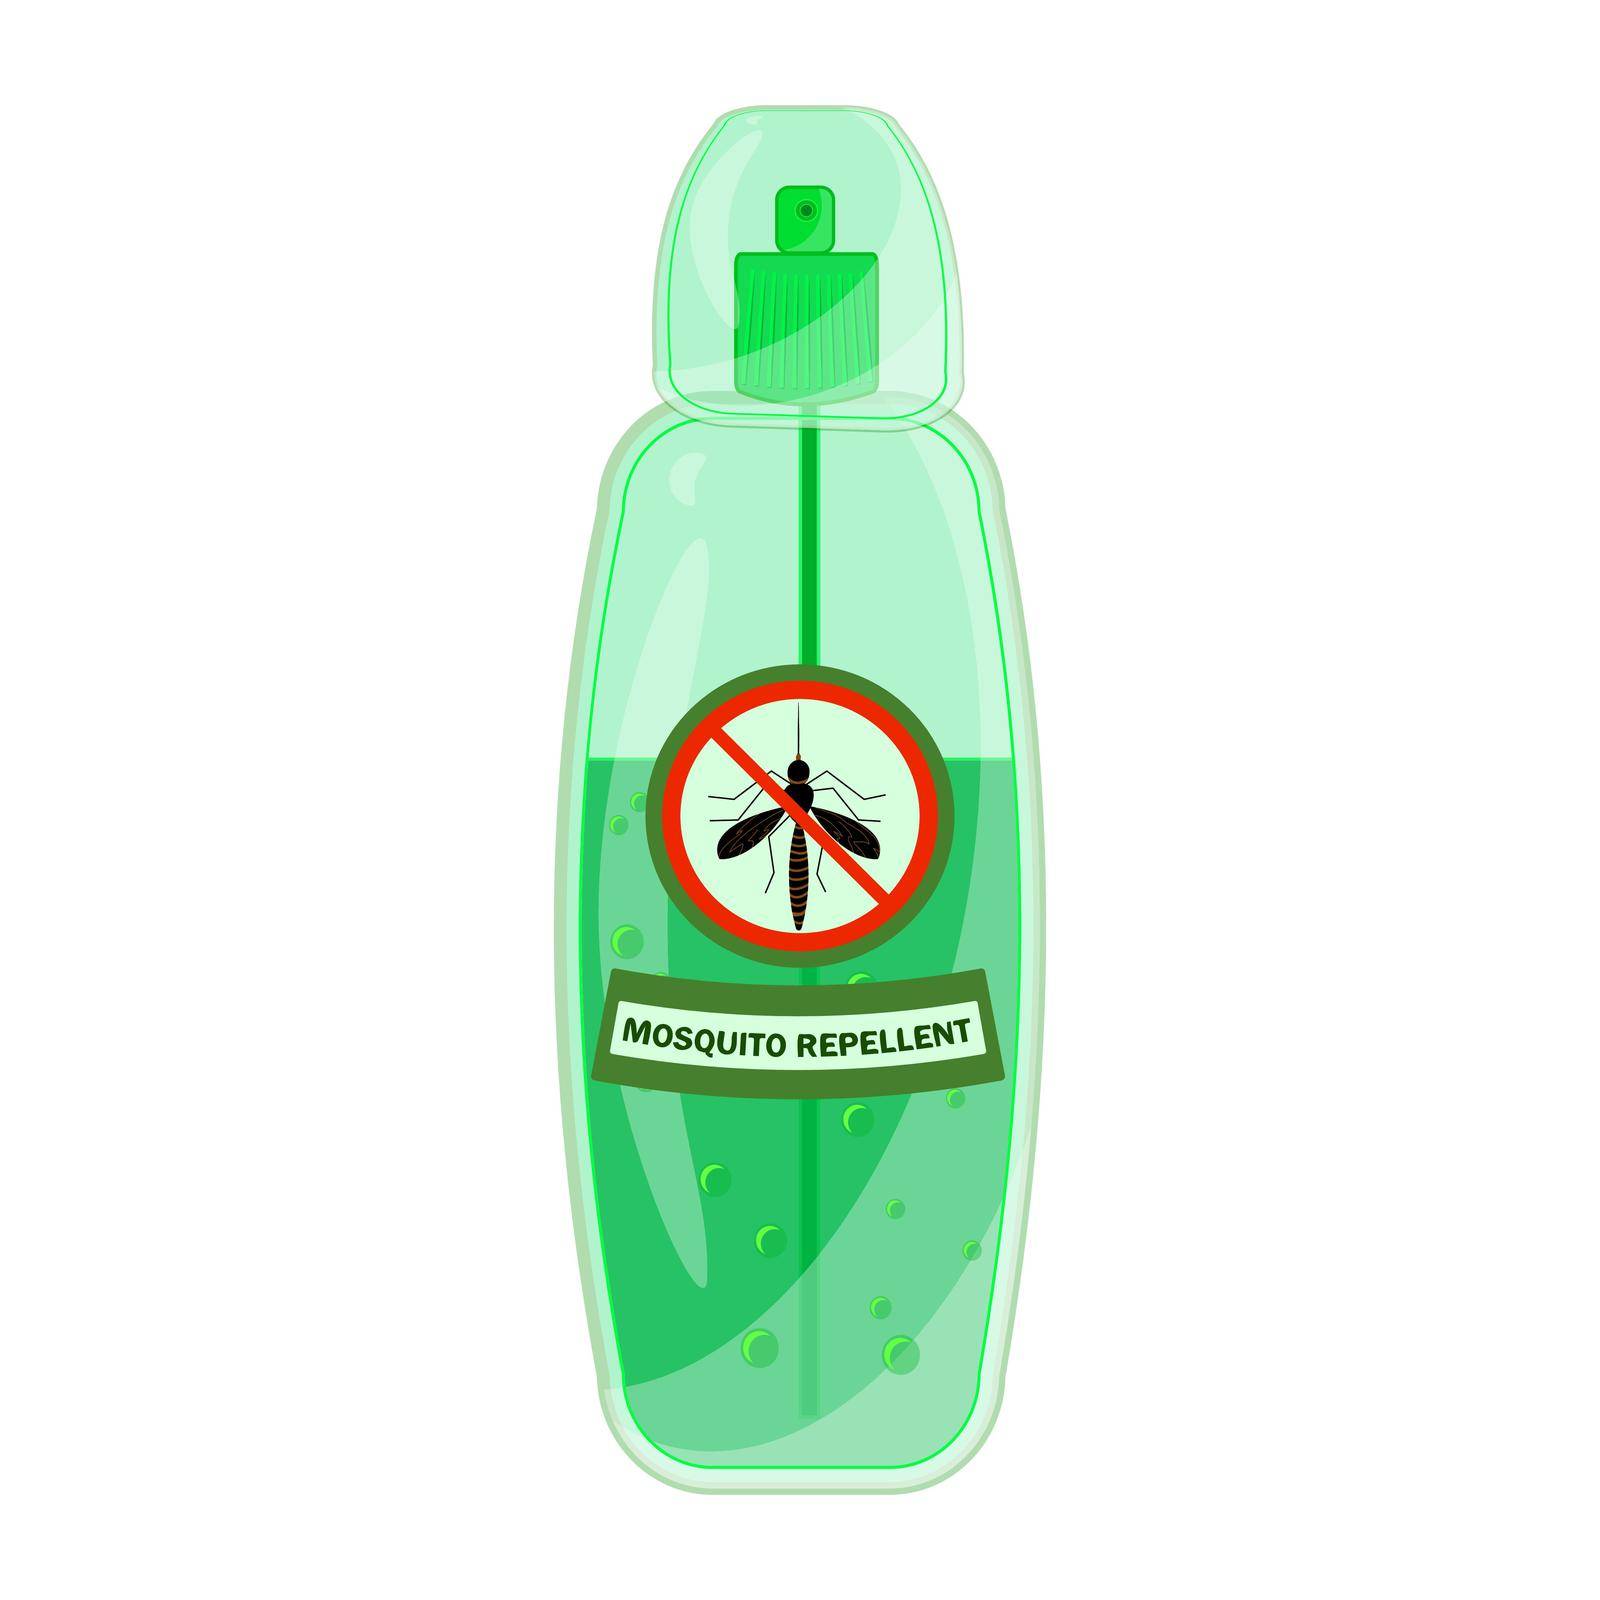 Mosquito repellent bottle spray with pest stop sign. Bug repellent spray aerosol prevention. Outdoor protection, repelling flying insects. Stock vector illustration